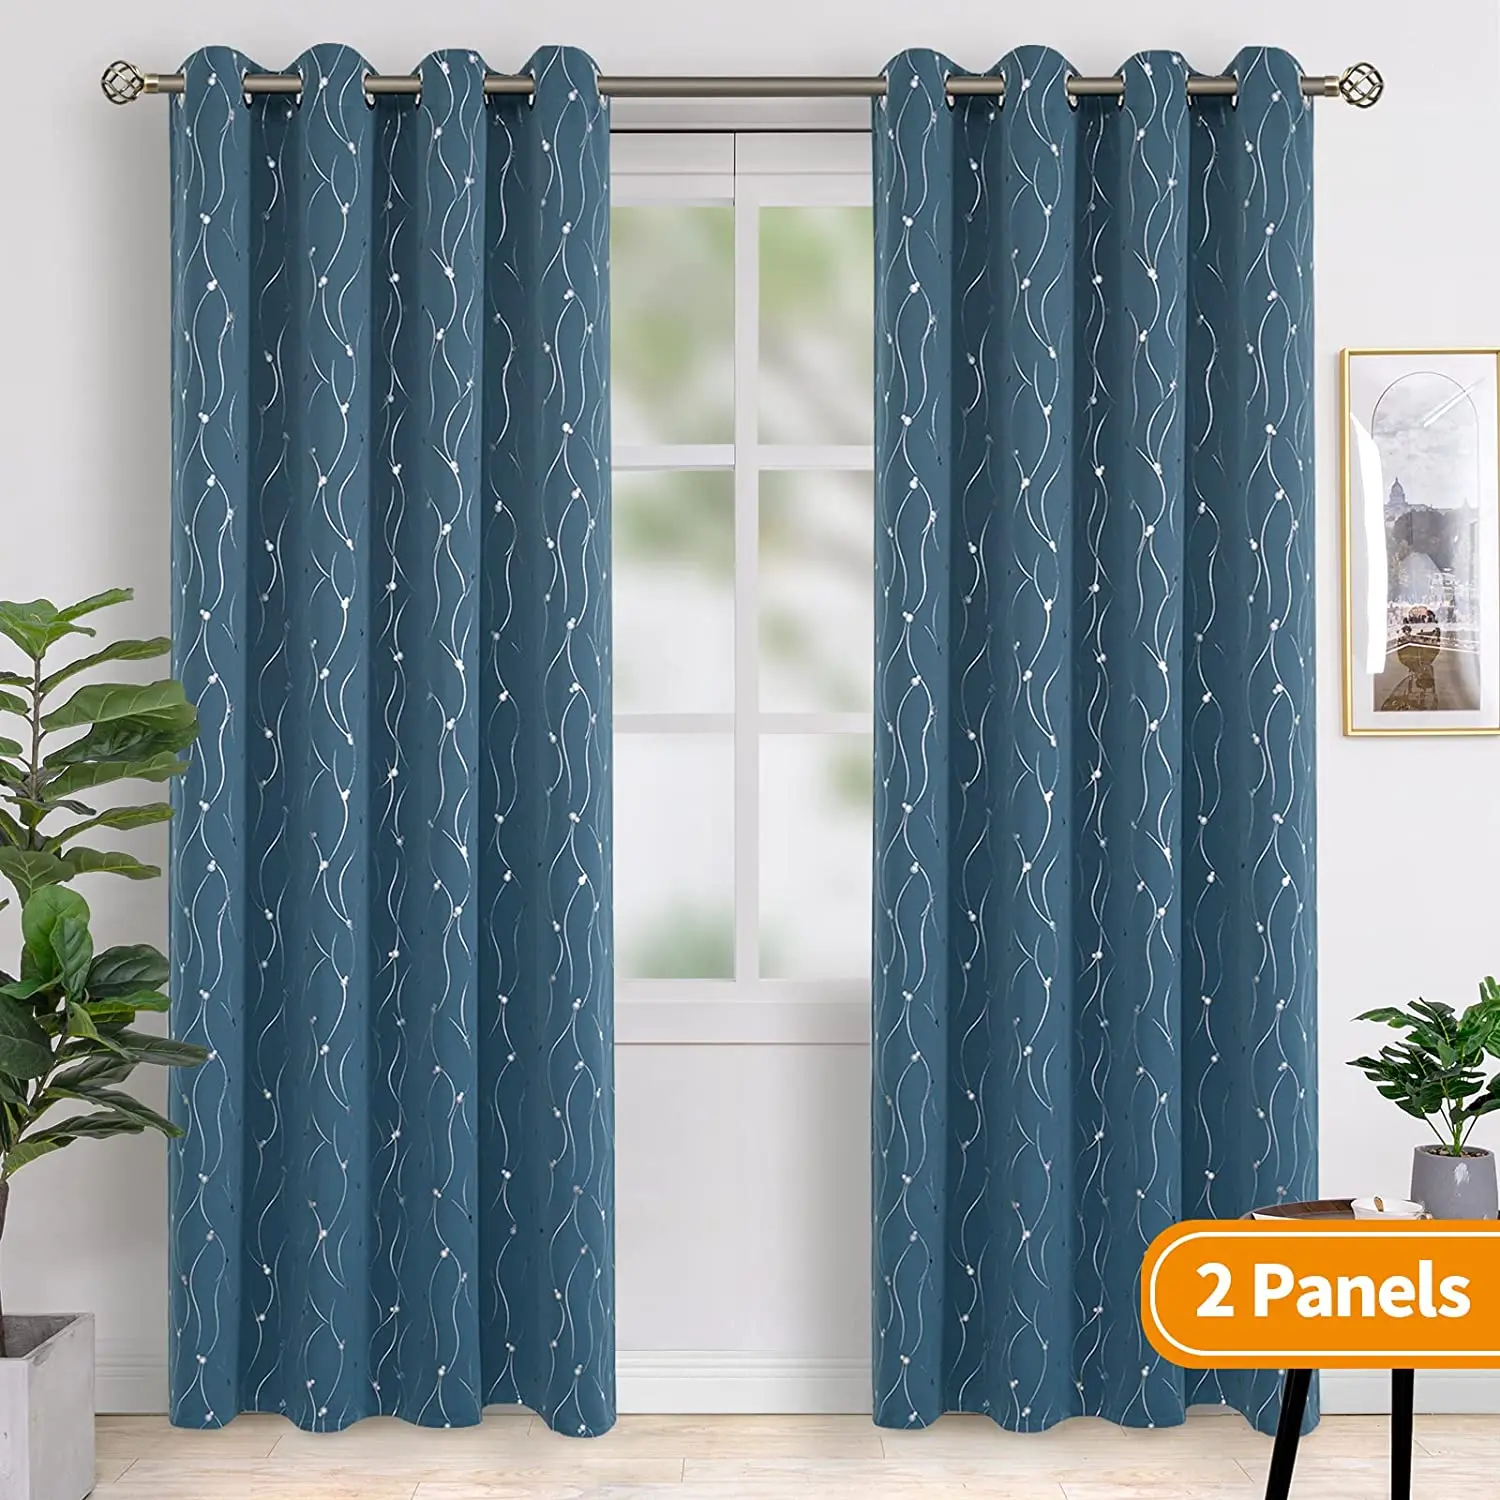 

Grommet Thermal Insulated Blackout Curtains with Wave Line and Dots Printed for Bedroom, Room Darkening Curtains 84 Inches Long